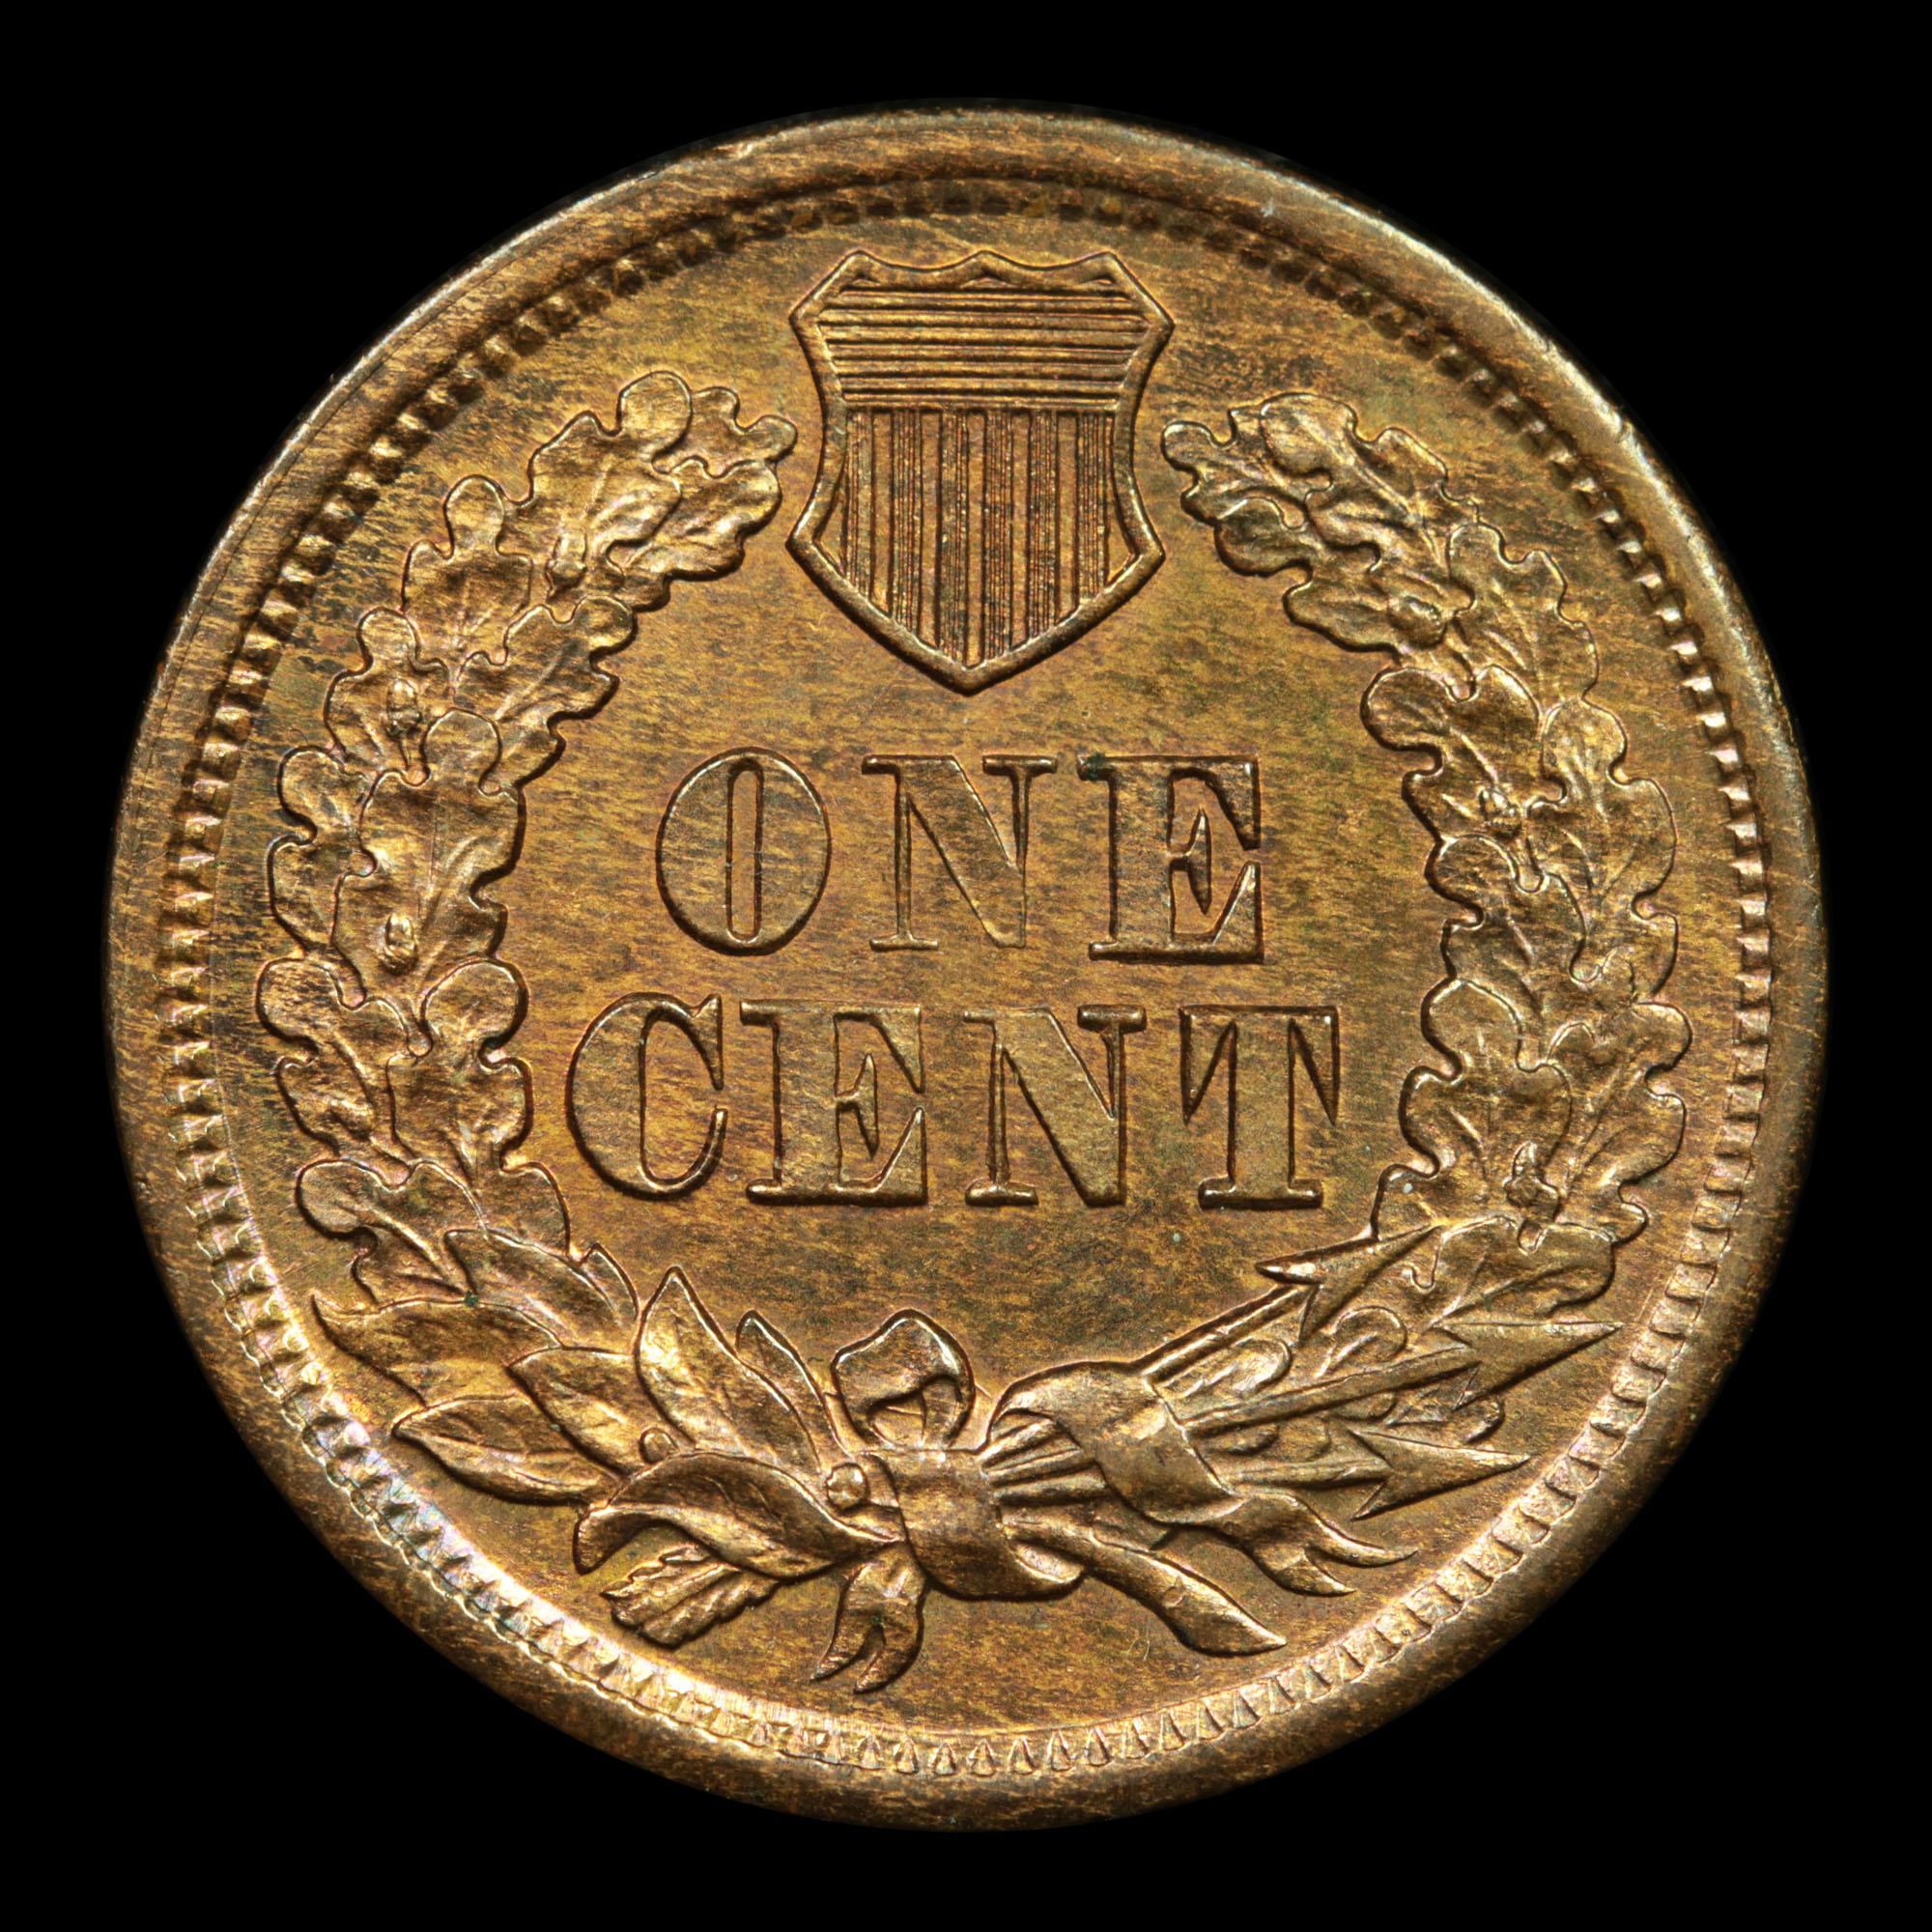 ***Auction Highlight*** 1864 Bronze Indian Cent 1c Graded GEM Unc RD By USCG (fc)